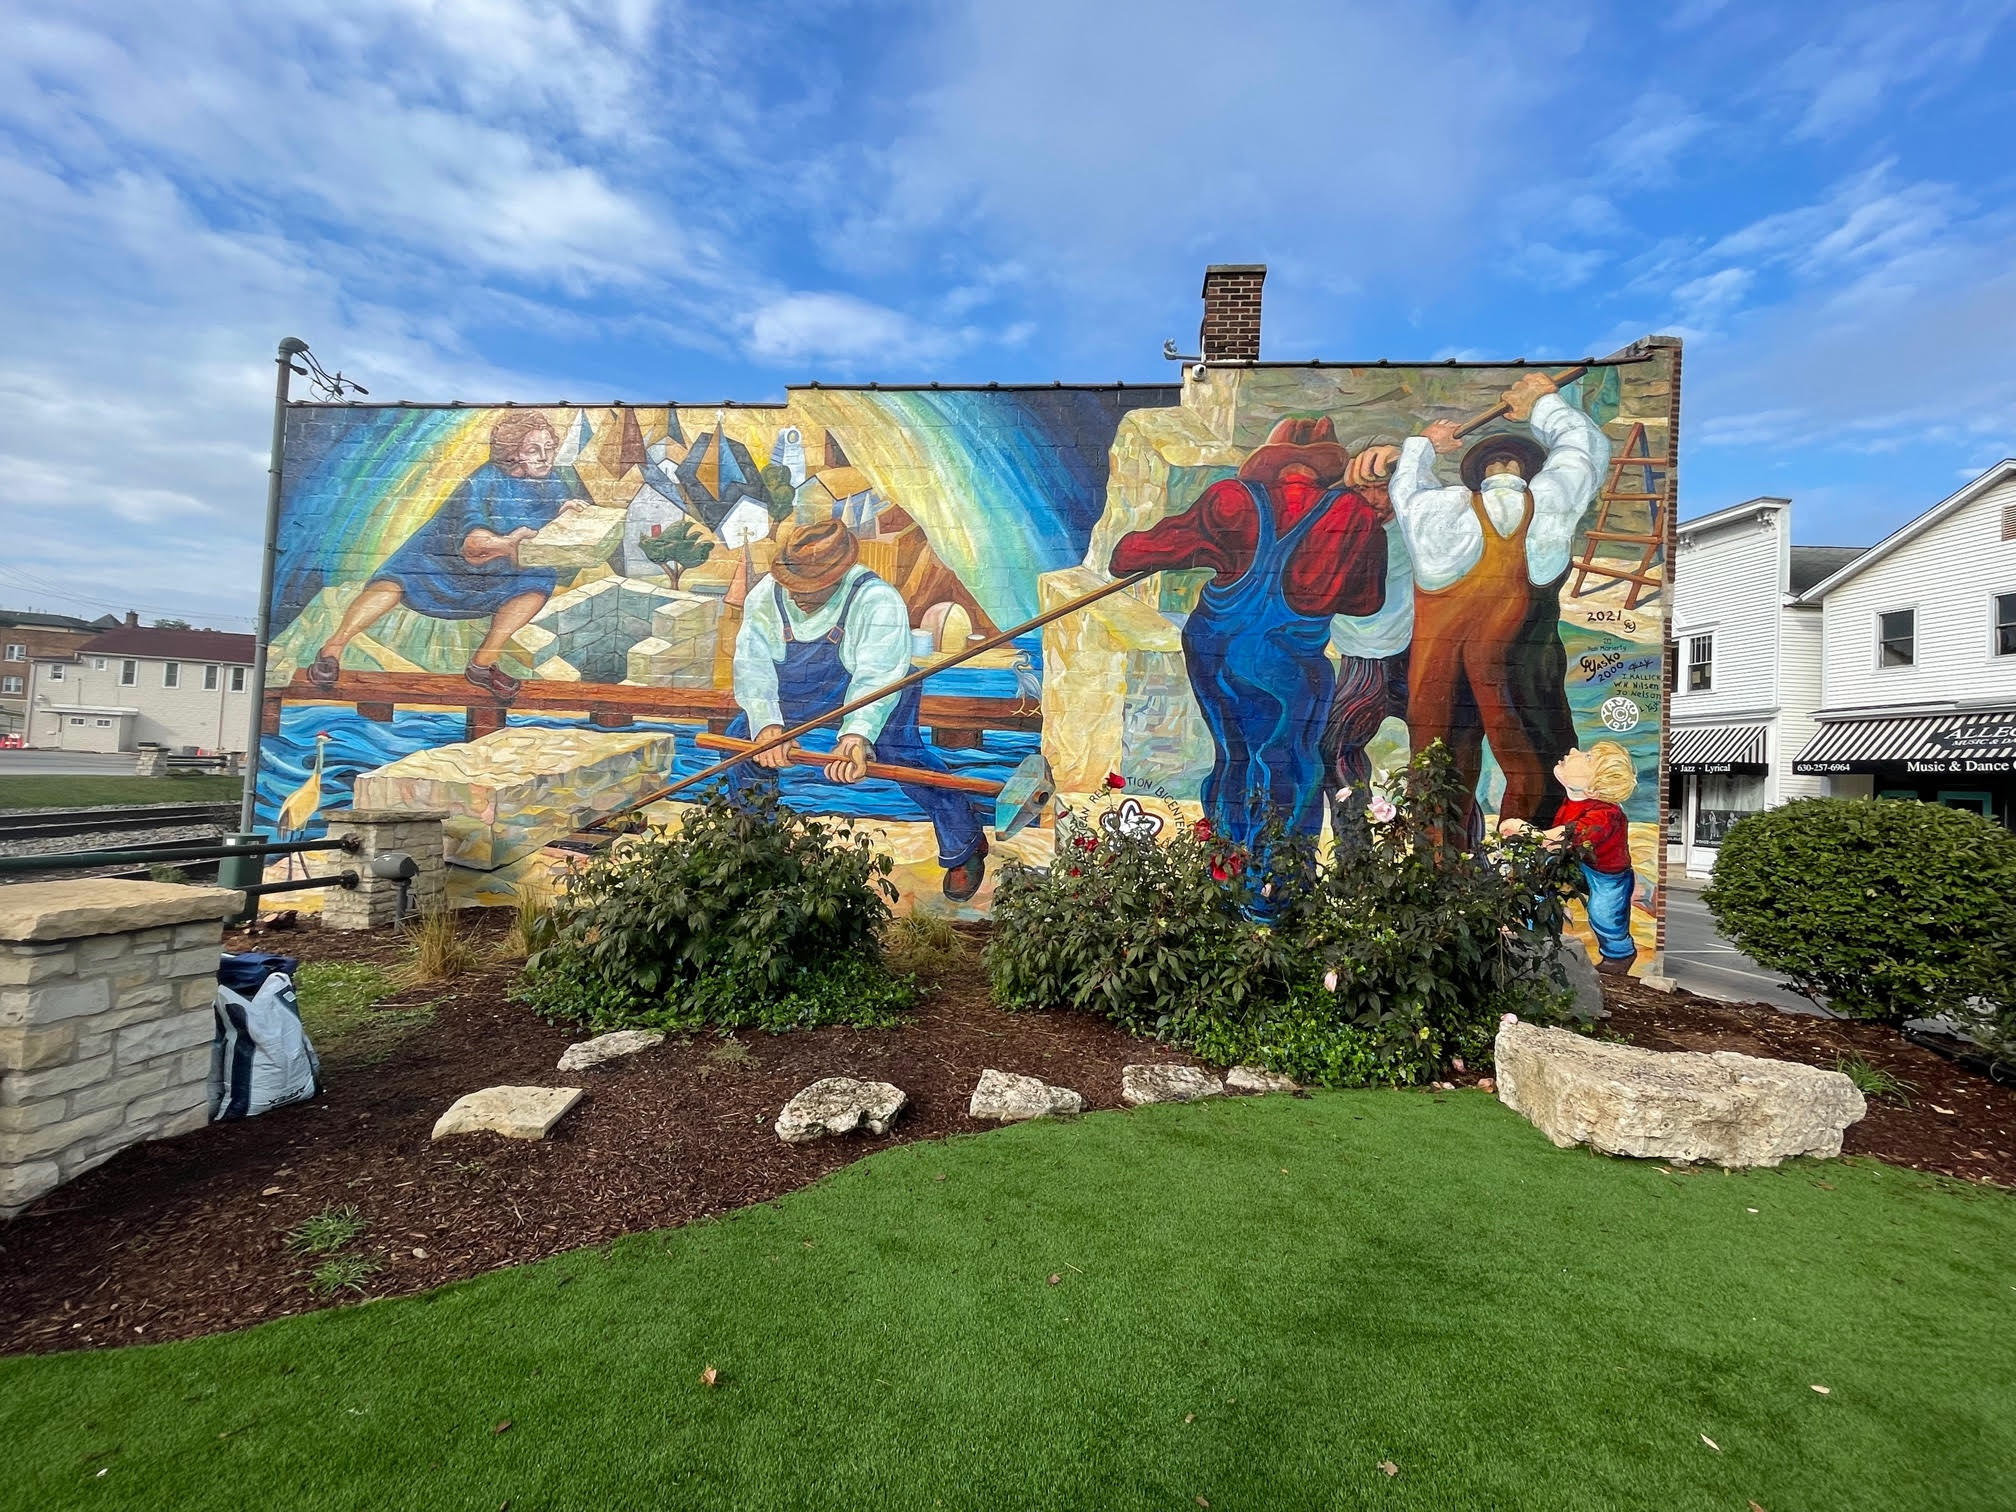 This mural, titled “Lemont Quarry Workers,” was painted in 1975 by Caryl Yasko when she was 34. She came back this year at 80 to again refurbish the mural honoring the southwest suburb’s limestone-cutting history.